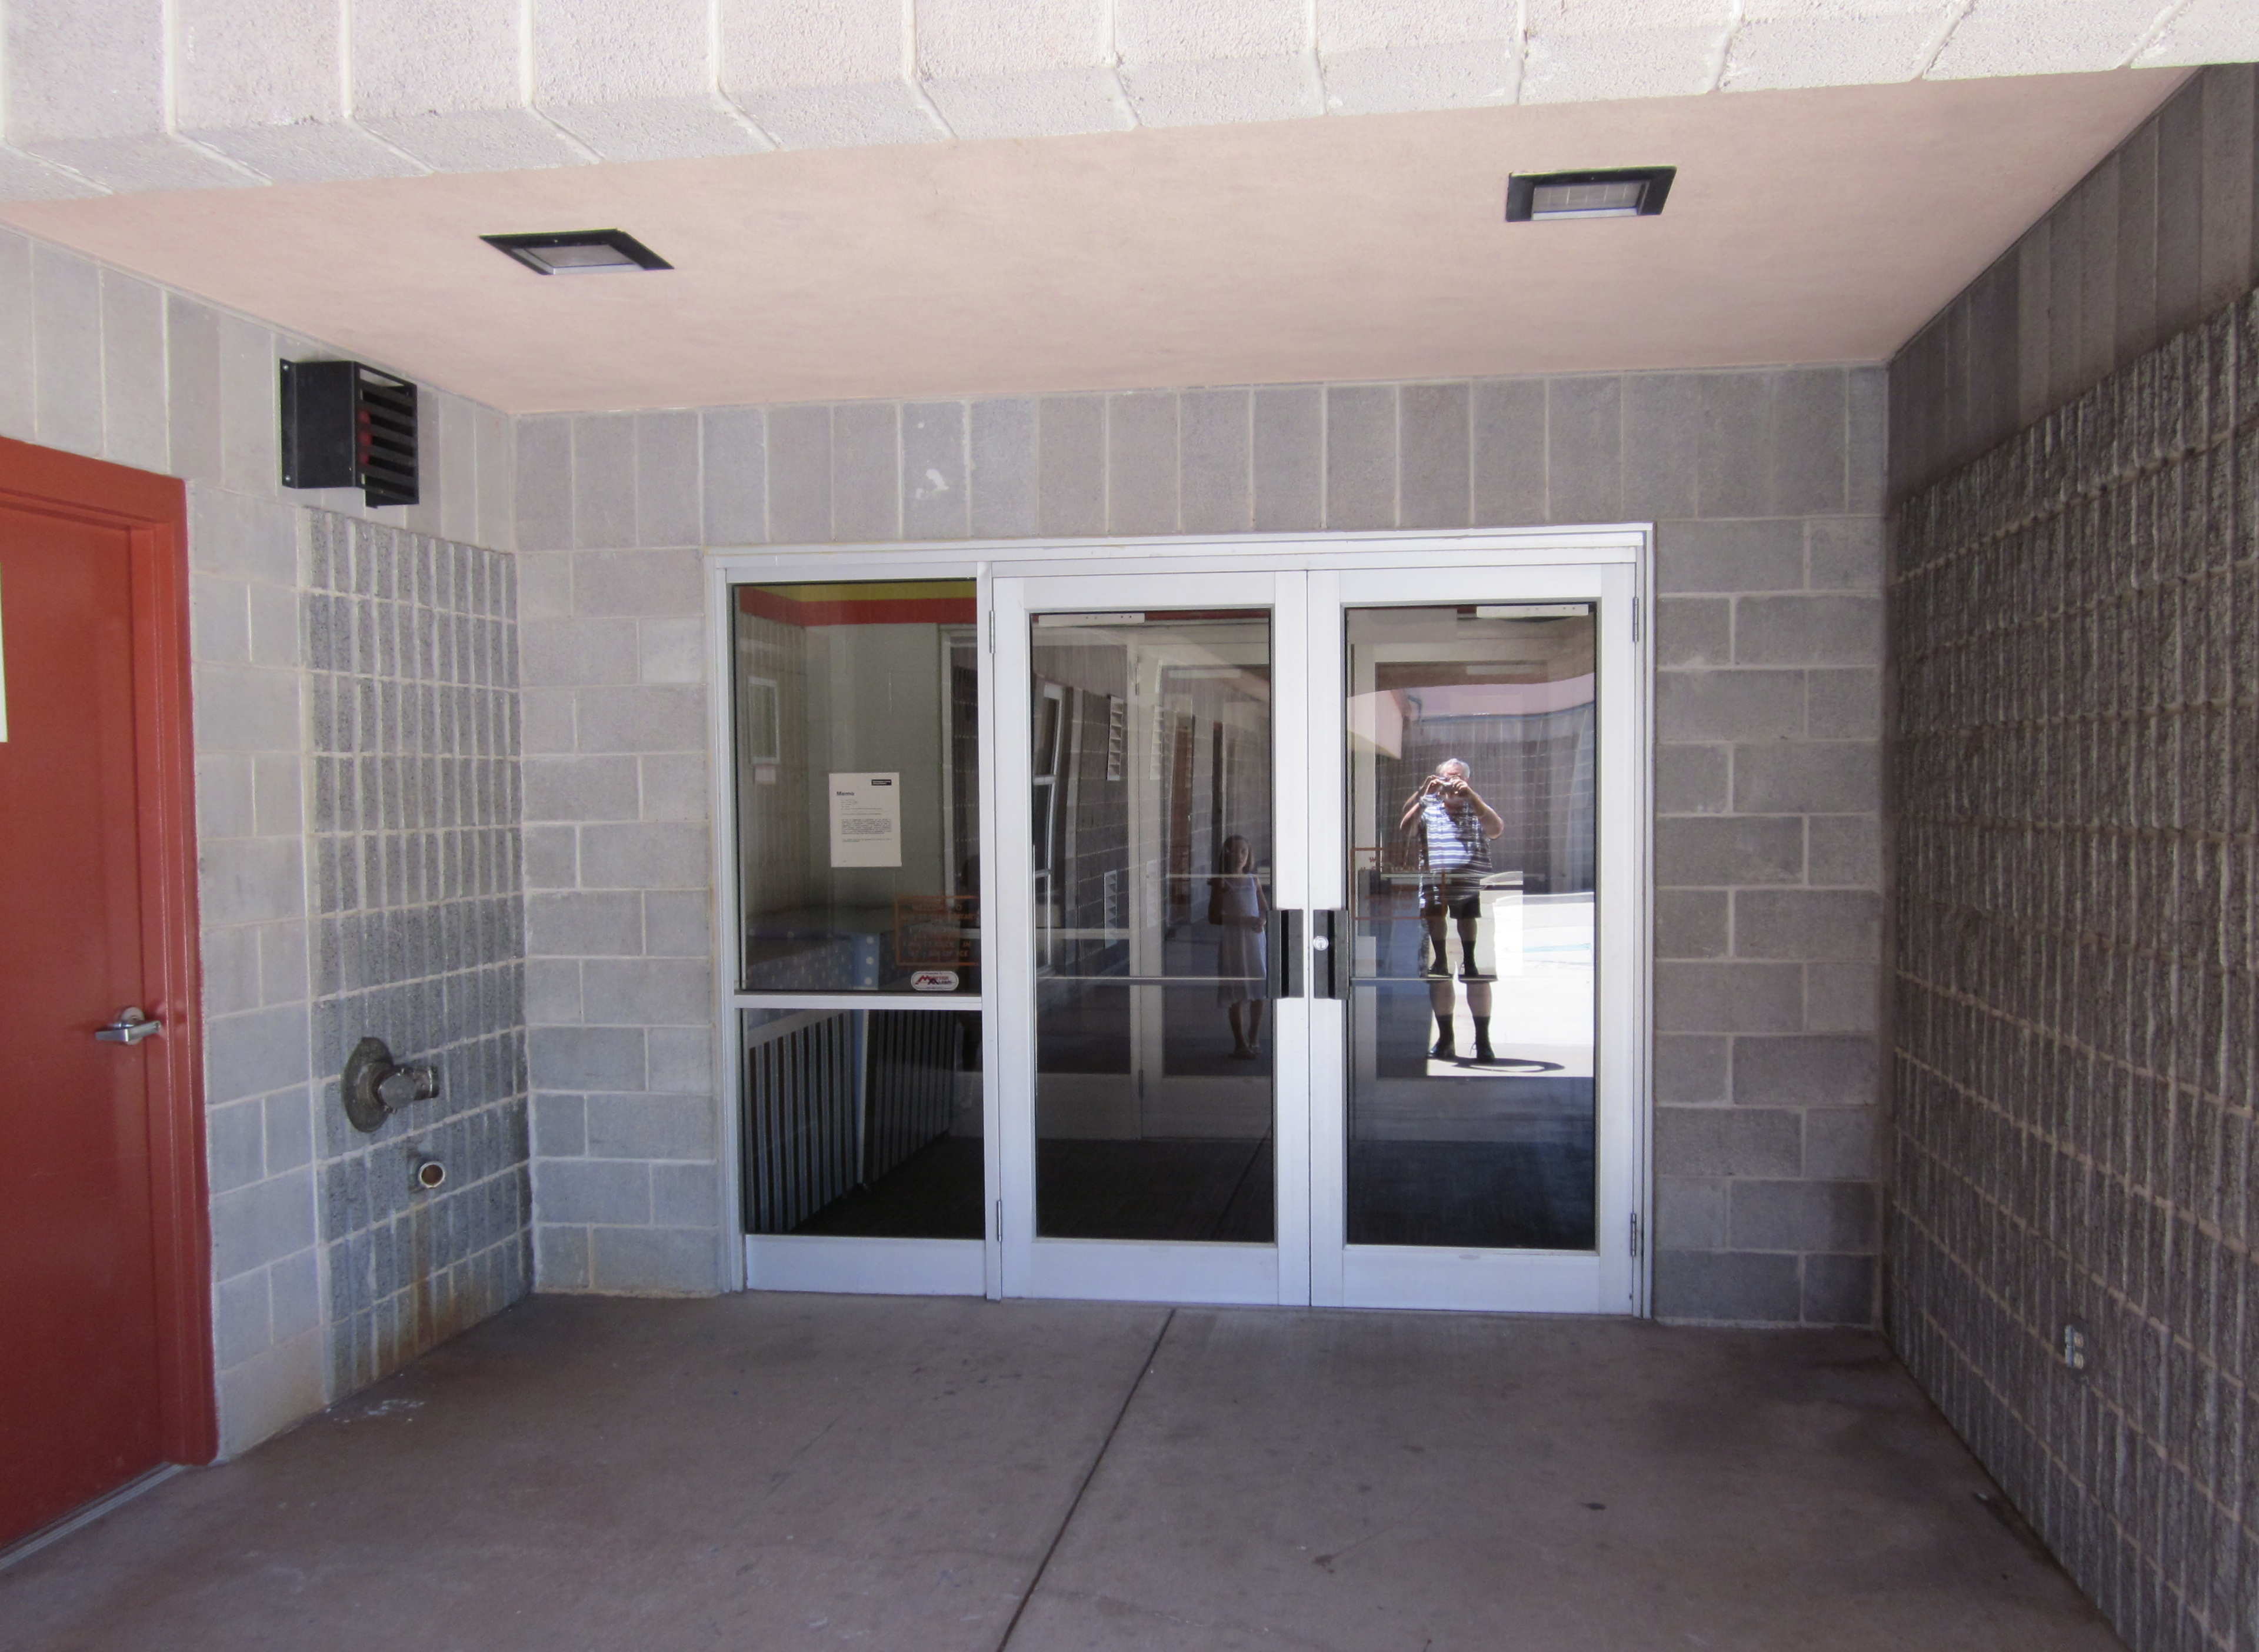 Entrance at the Sunset Elementary School